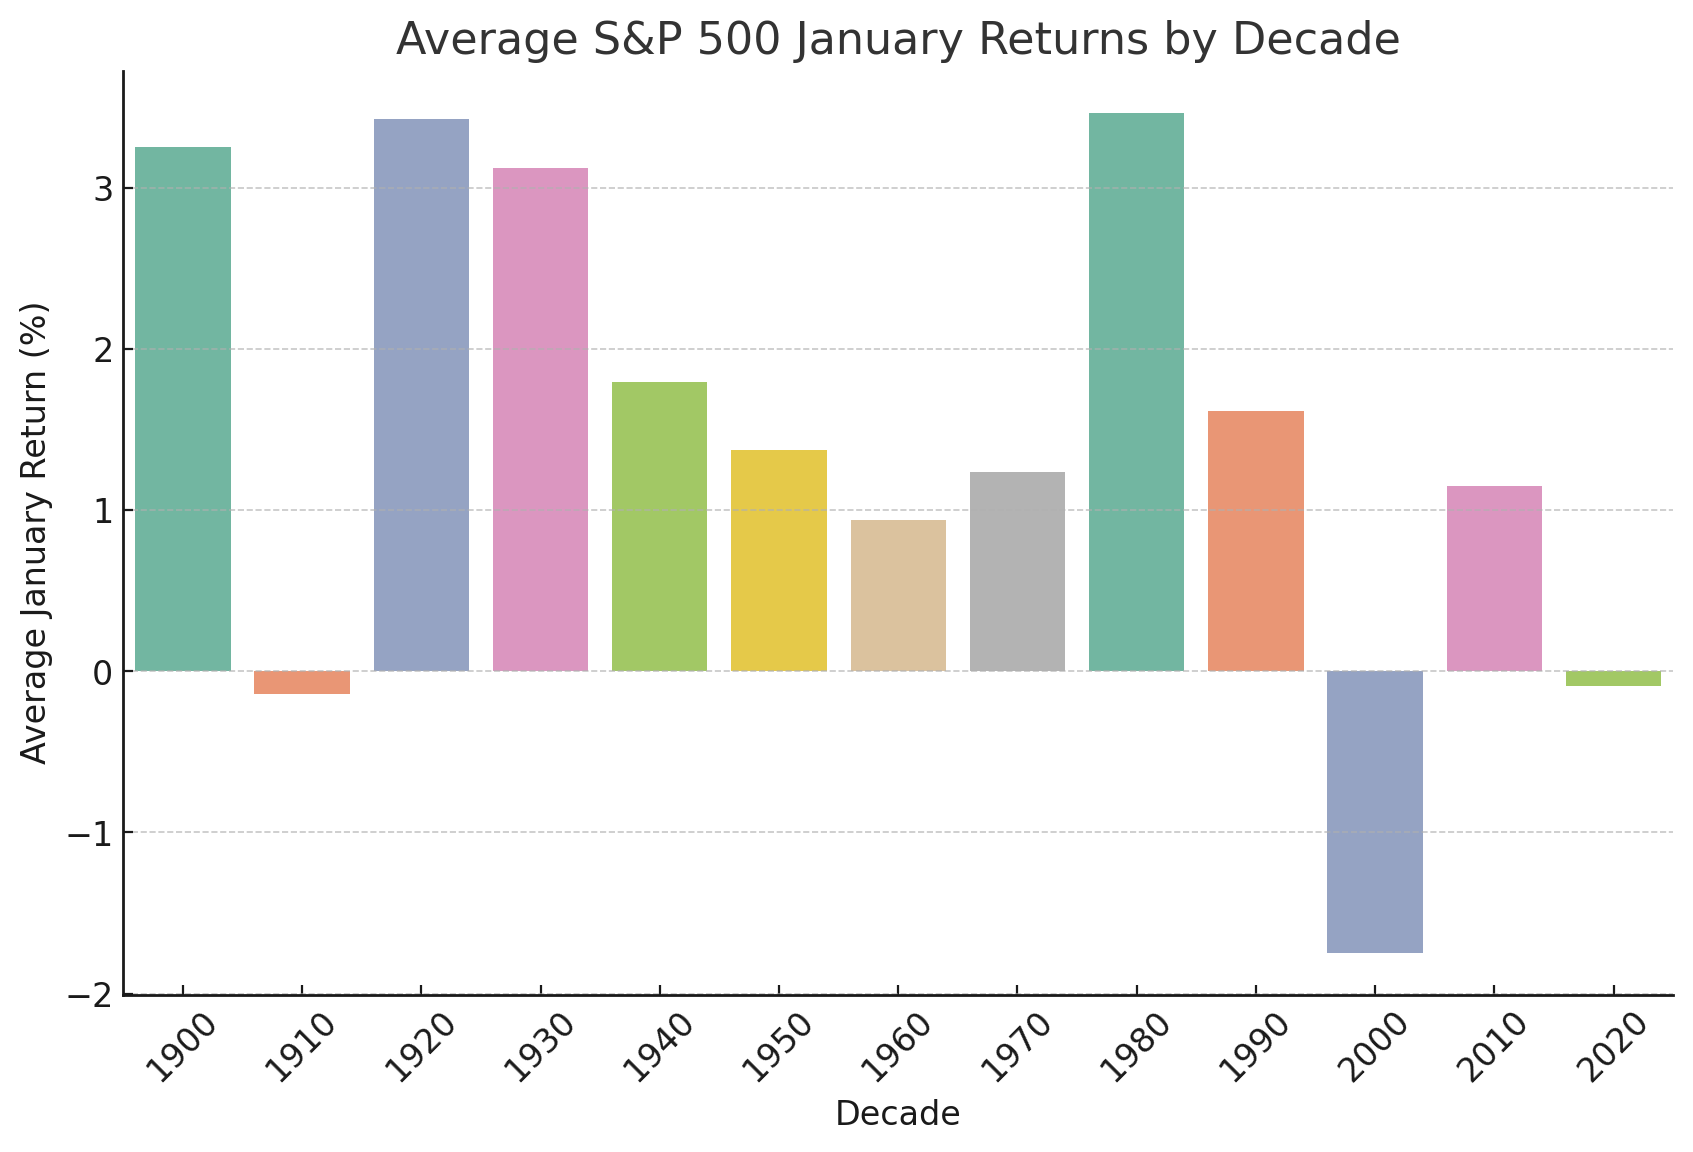 Average S&P 500 January Returns by Decade